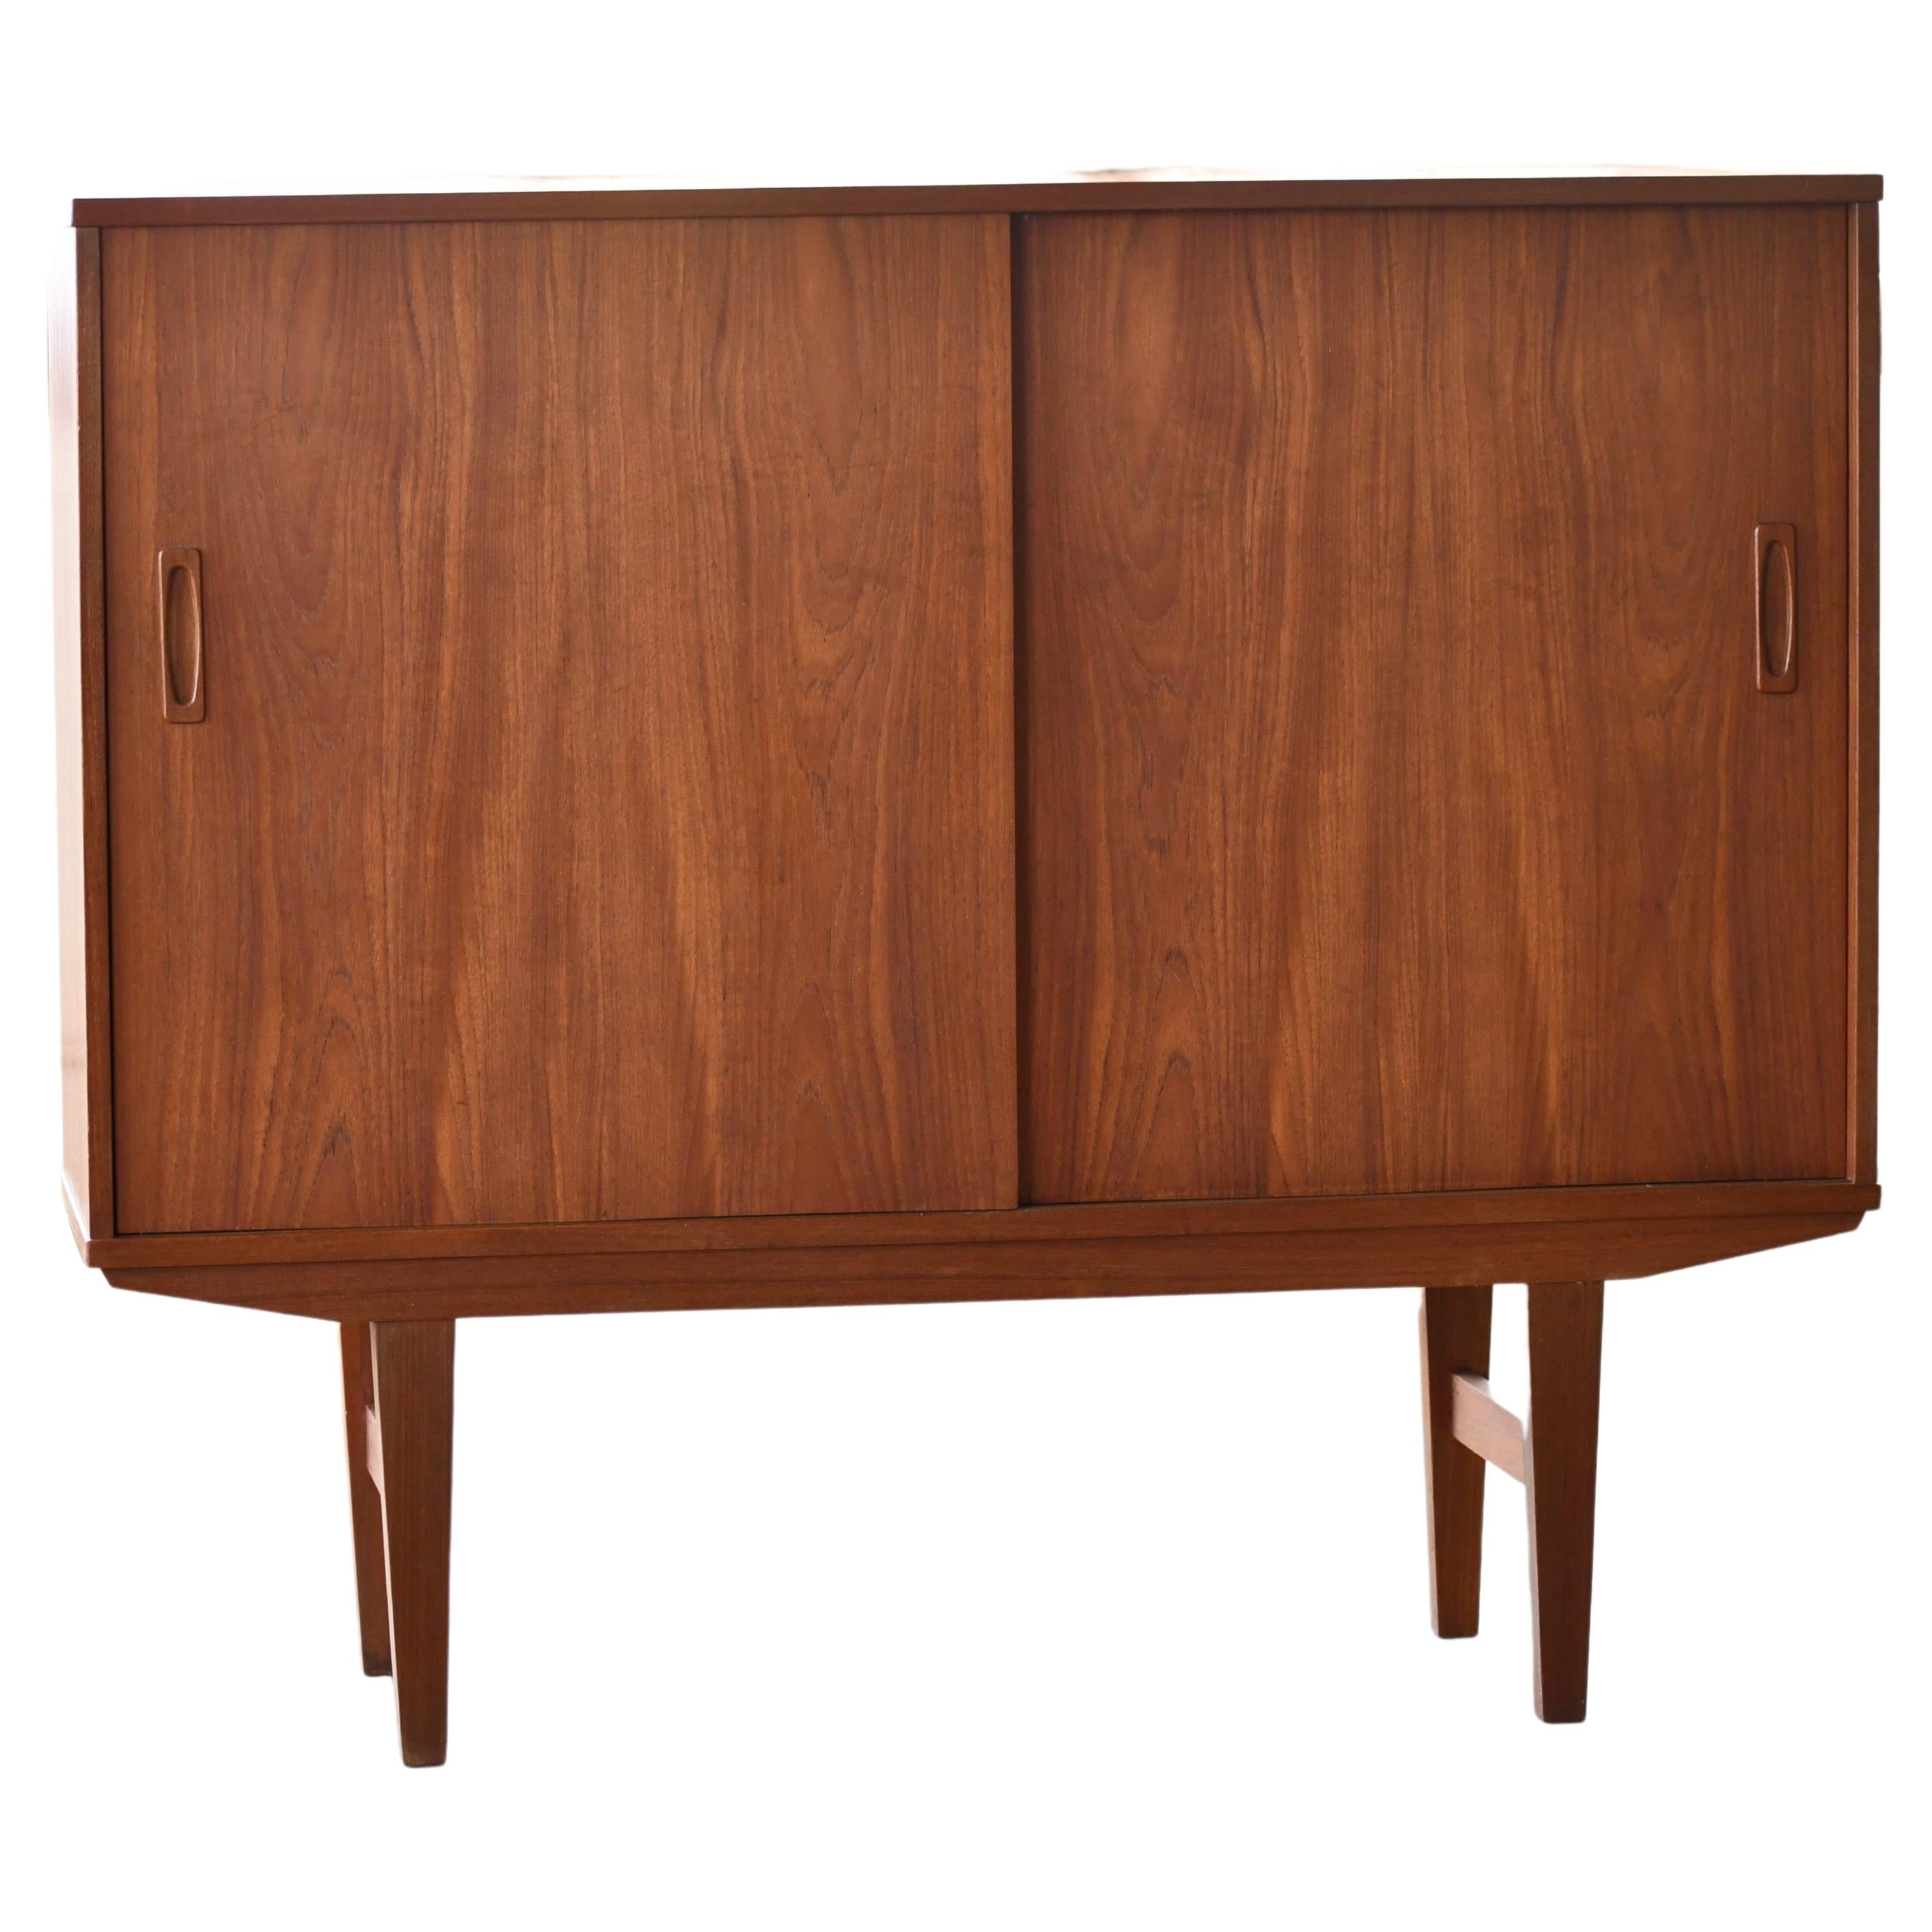 Danish 1960's Small Sideboard or Cabinet in Teak with Built-in-Bar For Sale